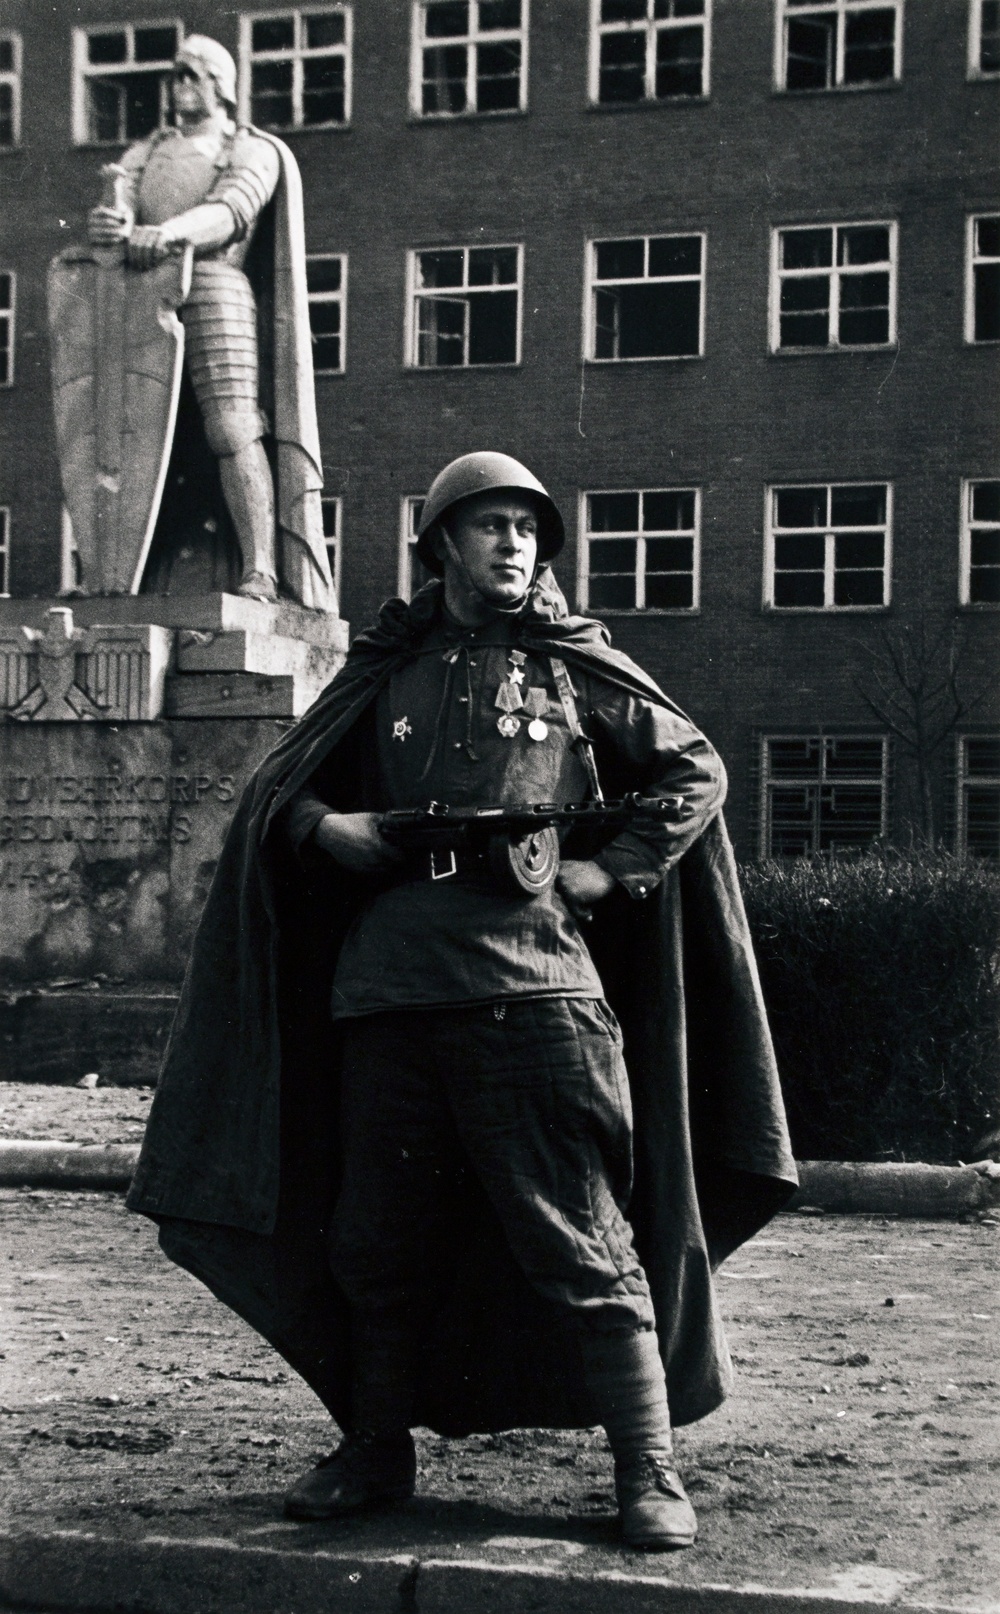 Black and white photograph of a man wearing military uniform holding a gun and posing with his hand on his hip, with a sculpture of a man in a suit of armor in the background.